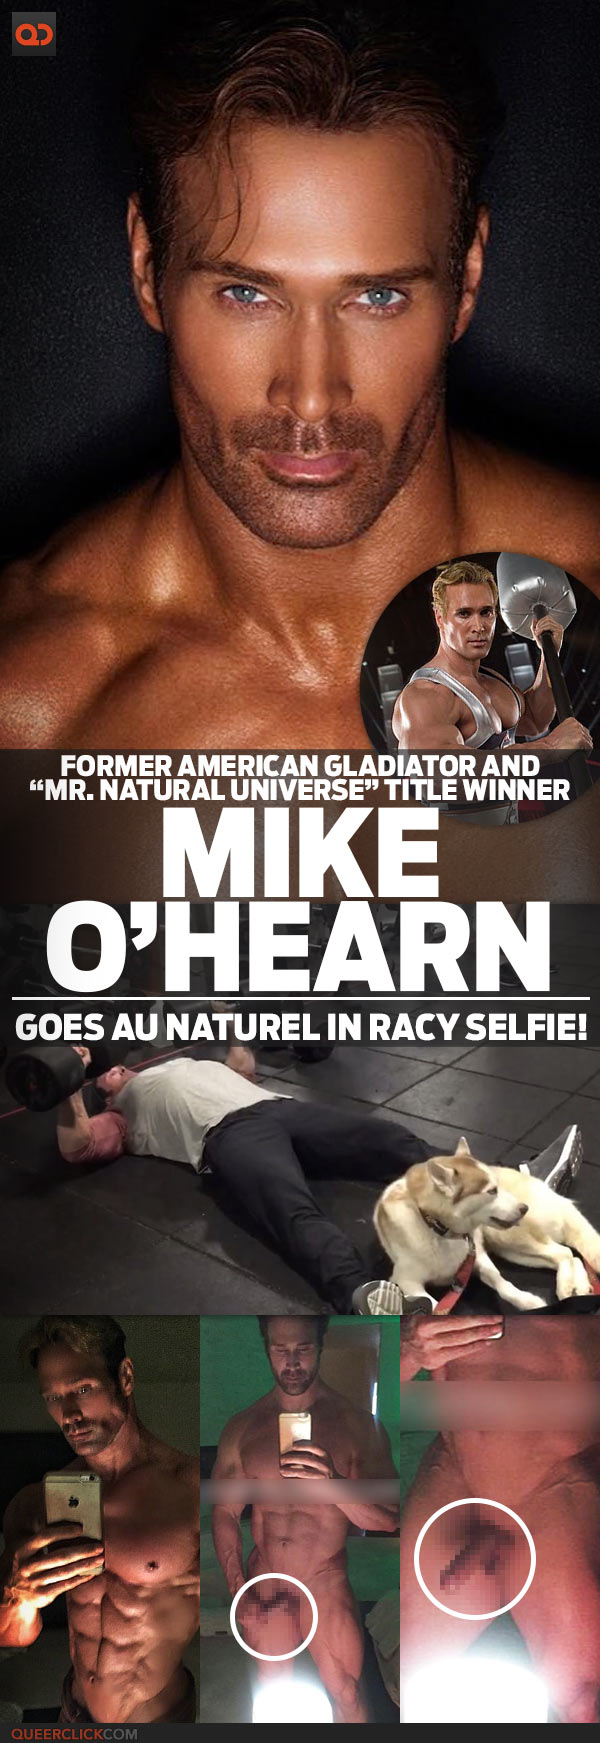 Mike Ohearn Porn - Mike O'Hearn, Former American Gladiator And â€œMr. Natural Universeâ€ Title  Winner Goes Au Natural In Racy Selfie! - QueerClick